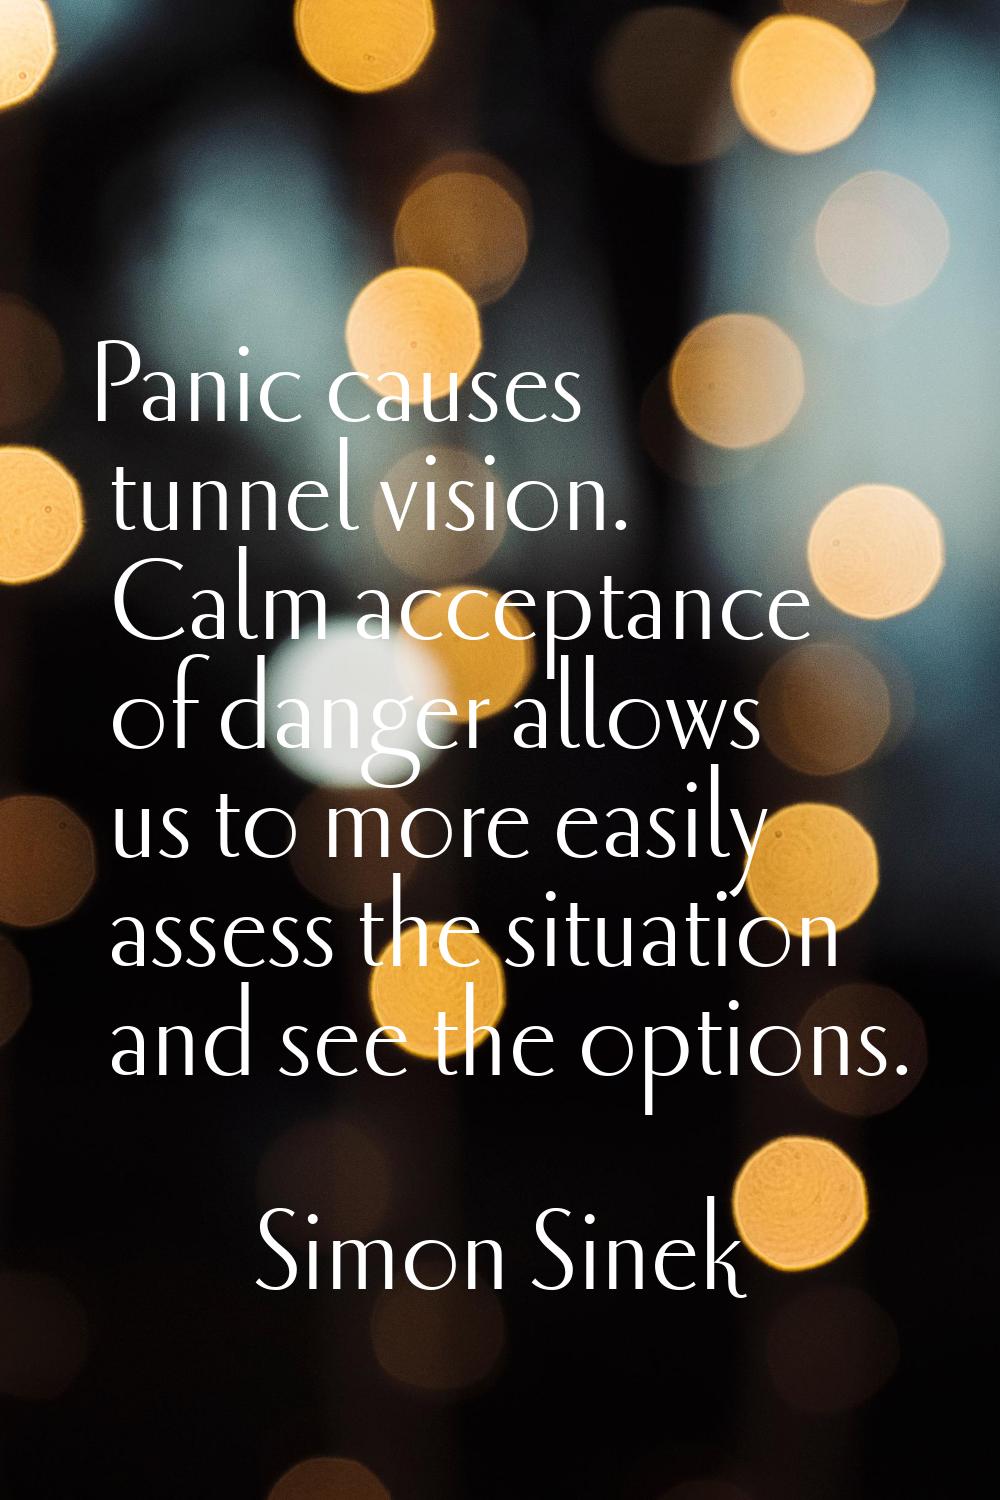 Panic causes tunnel vision. Calm acceptance of danger allows us to more easily assess the situation